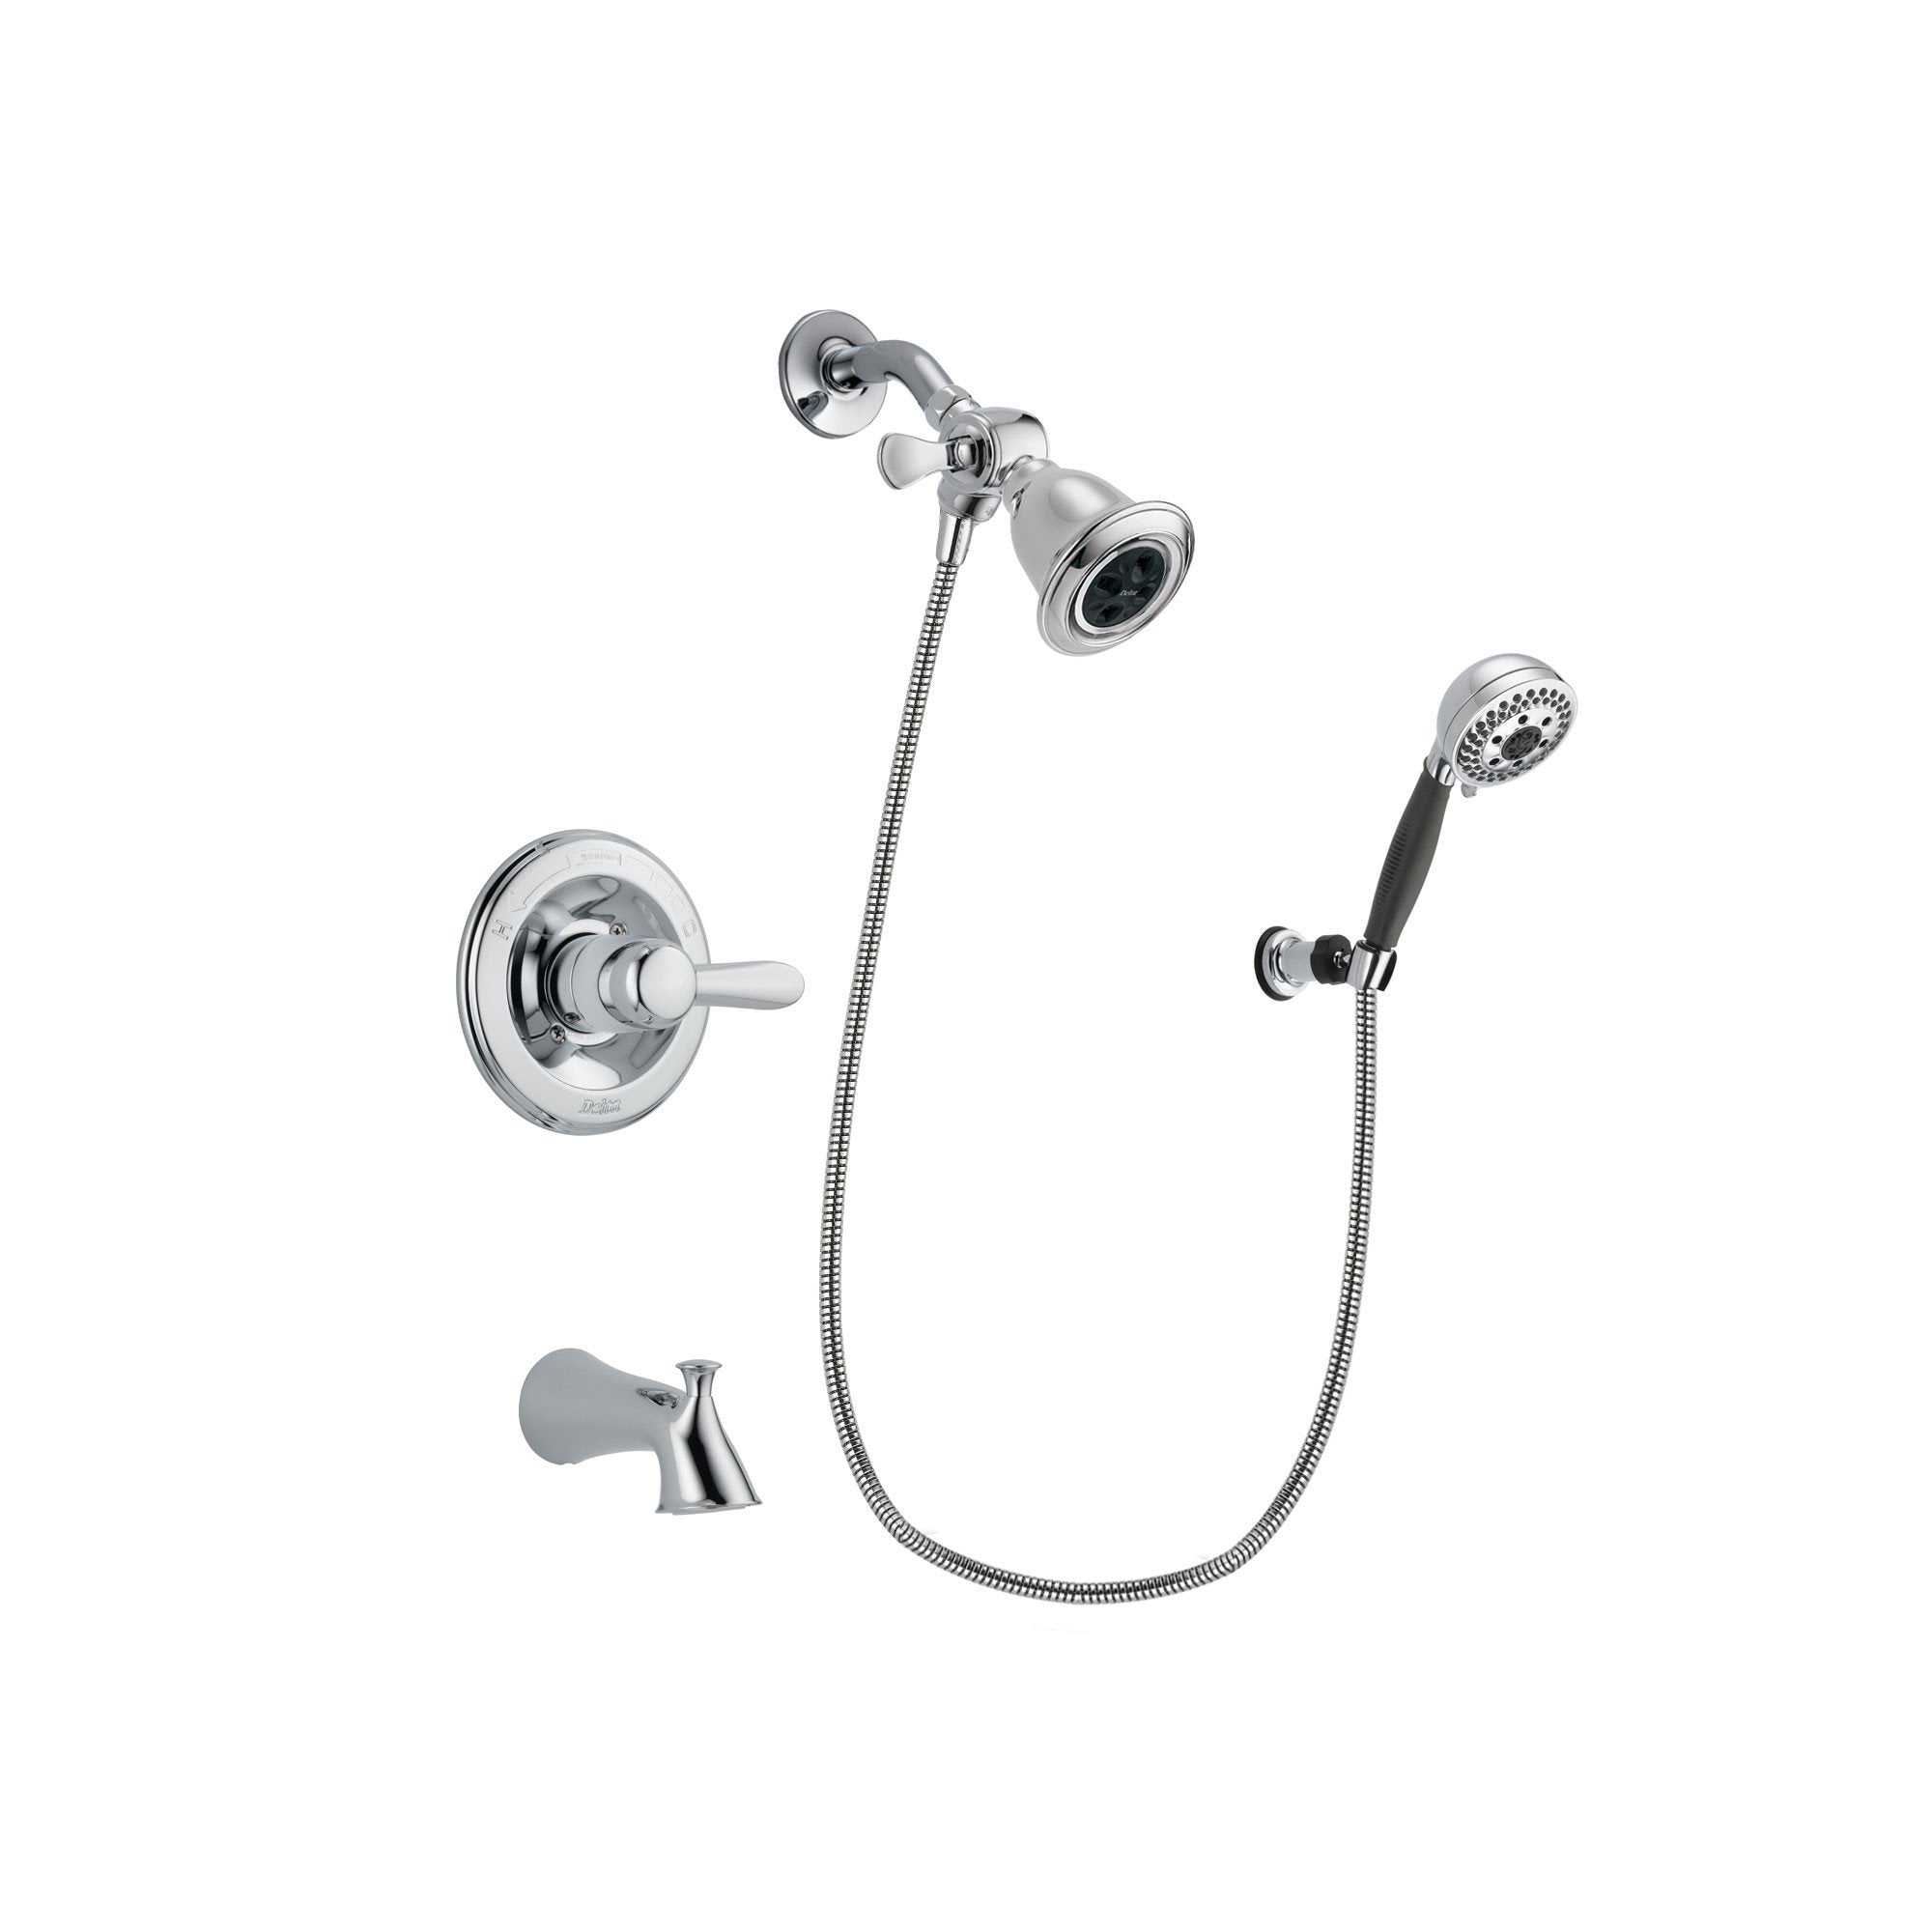 Delta Lahara Chrome Finish Tub And Shower Faucet System Package With Water Efficient Showerhead And 5 Spray Modern Handheld Shower With Wall Bracket